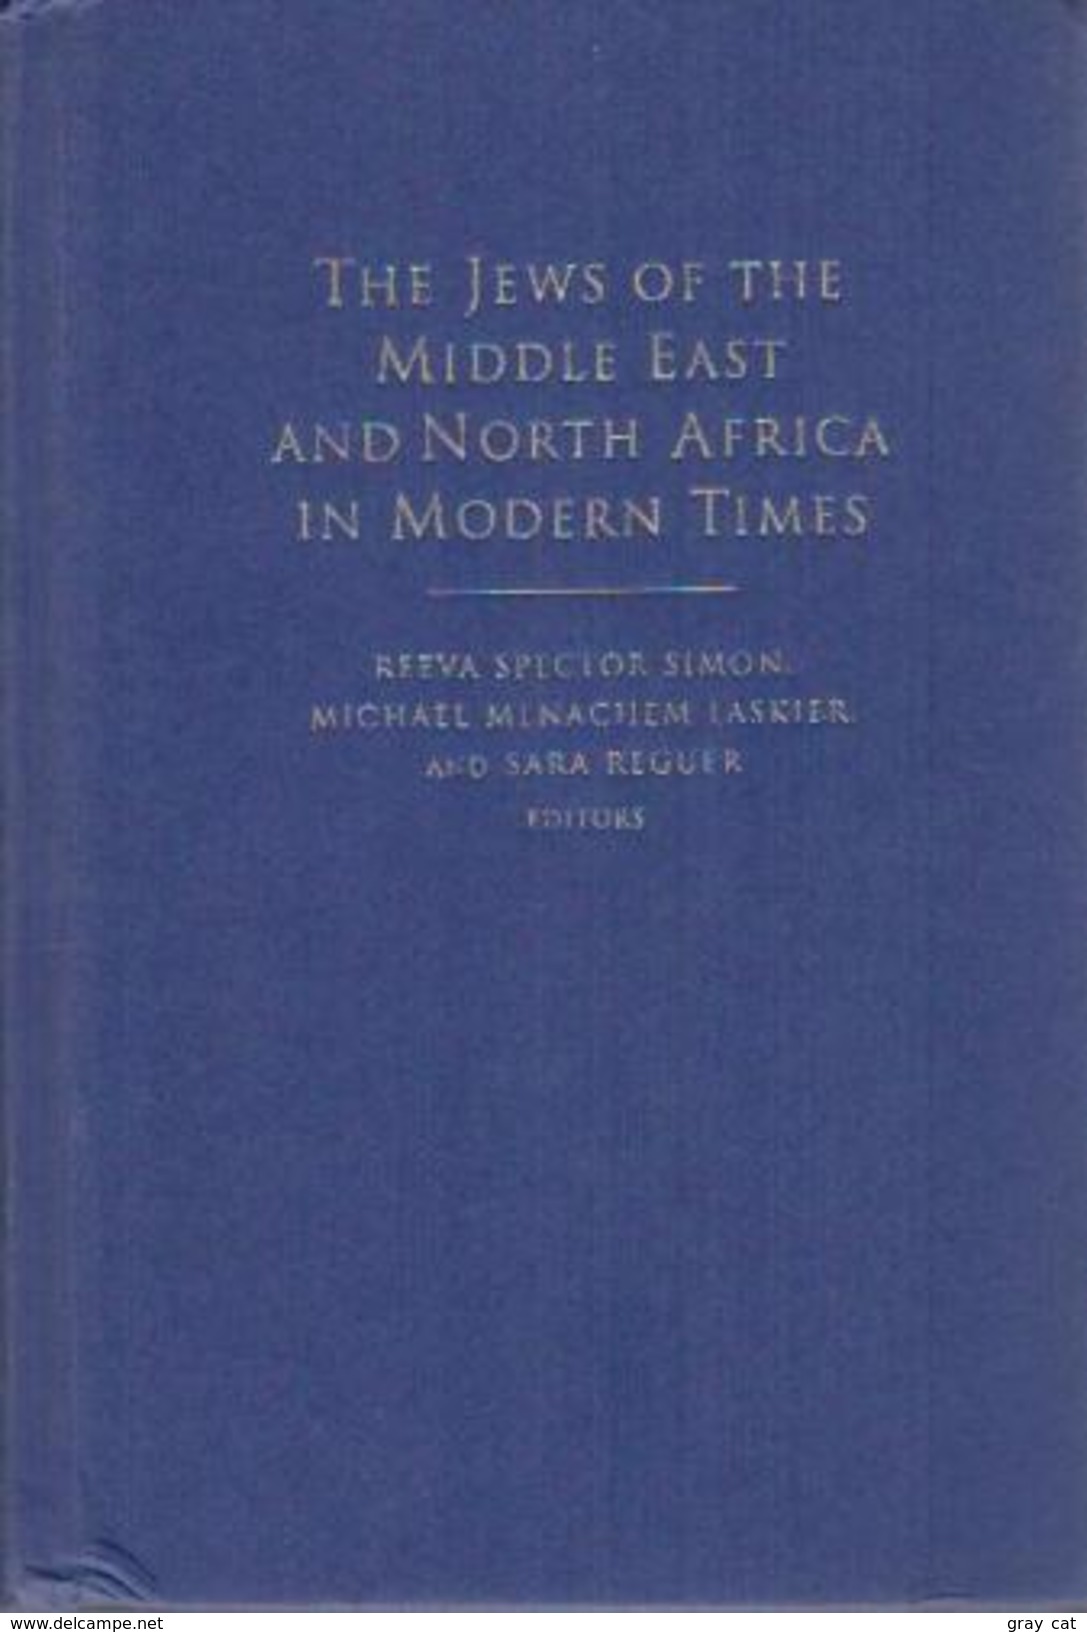 The Jews Of The Middle East And North Africa In Modern Times By Michael Menachem Laskier (ISBN 9780231107969) - Middle East